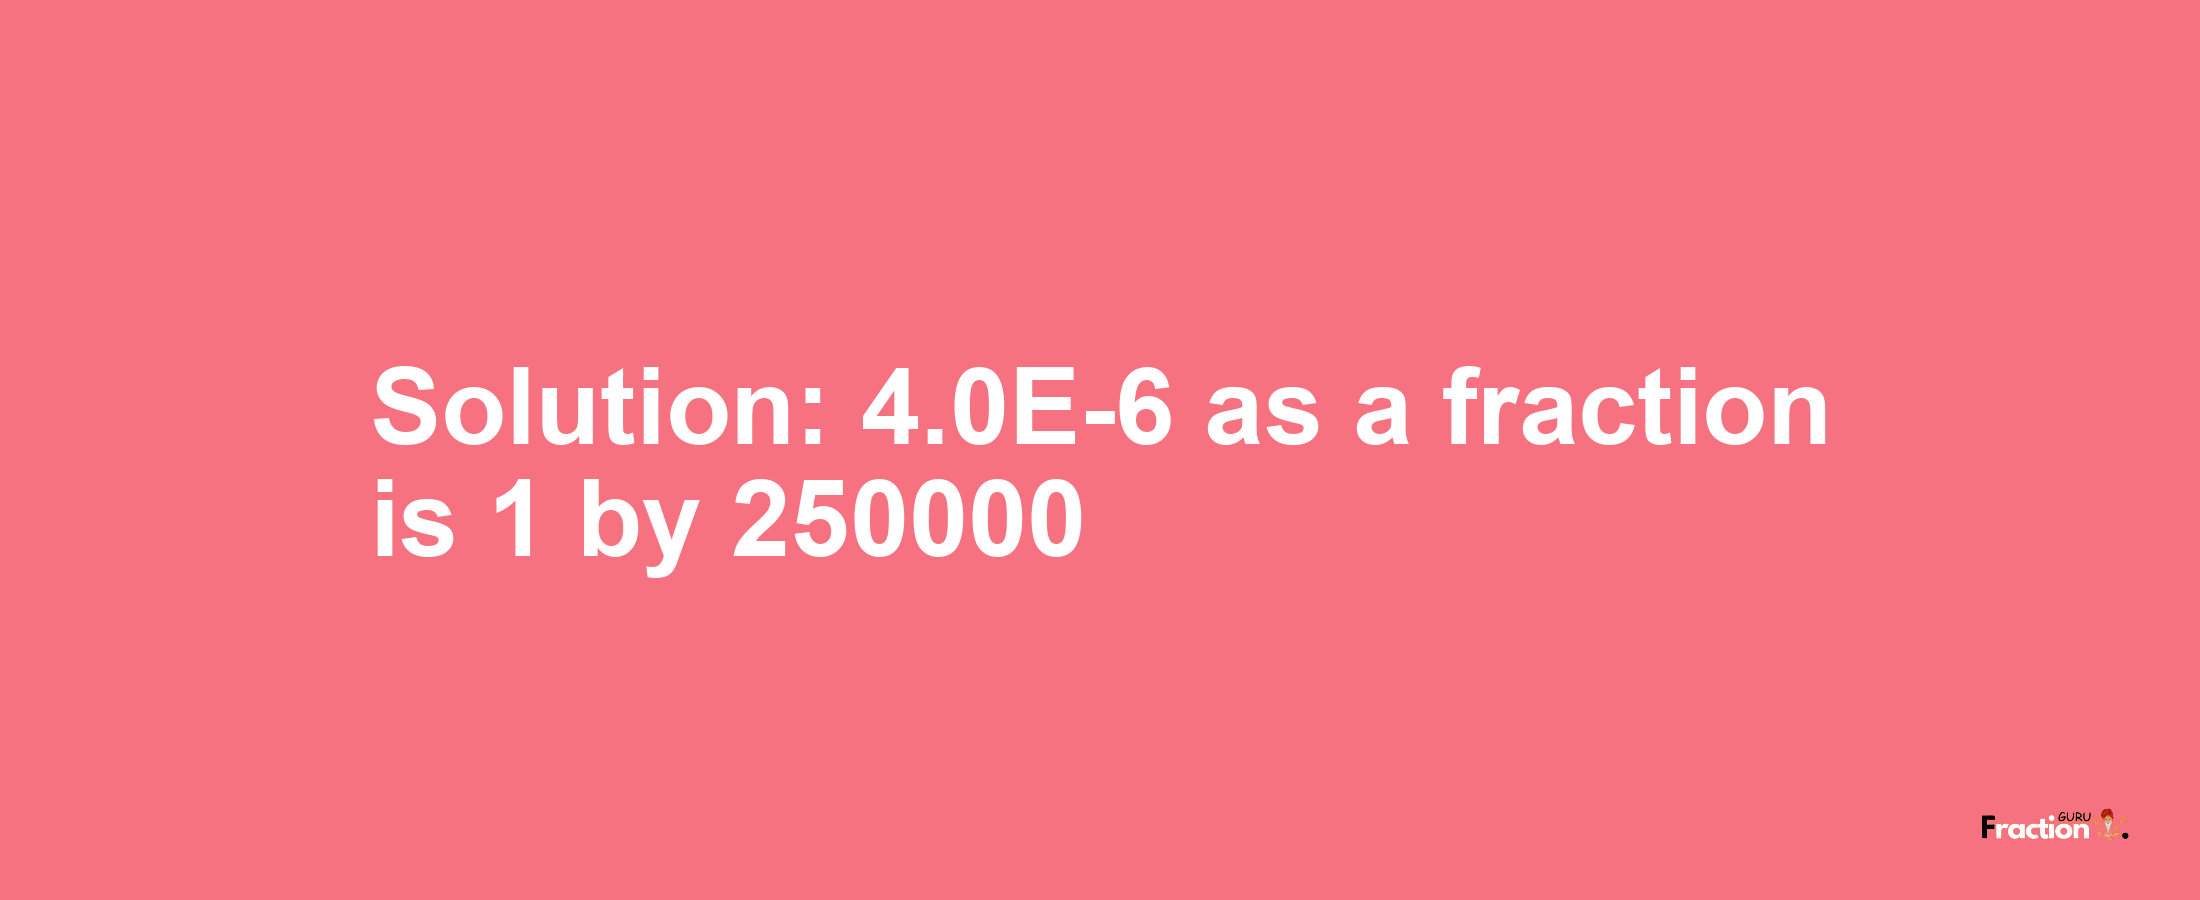 Solution:4.0E-6 as a fraction is 1/250000